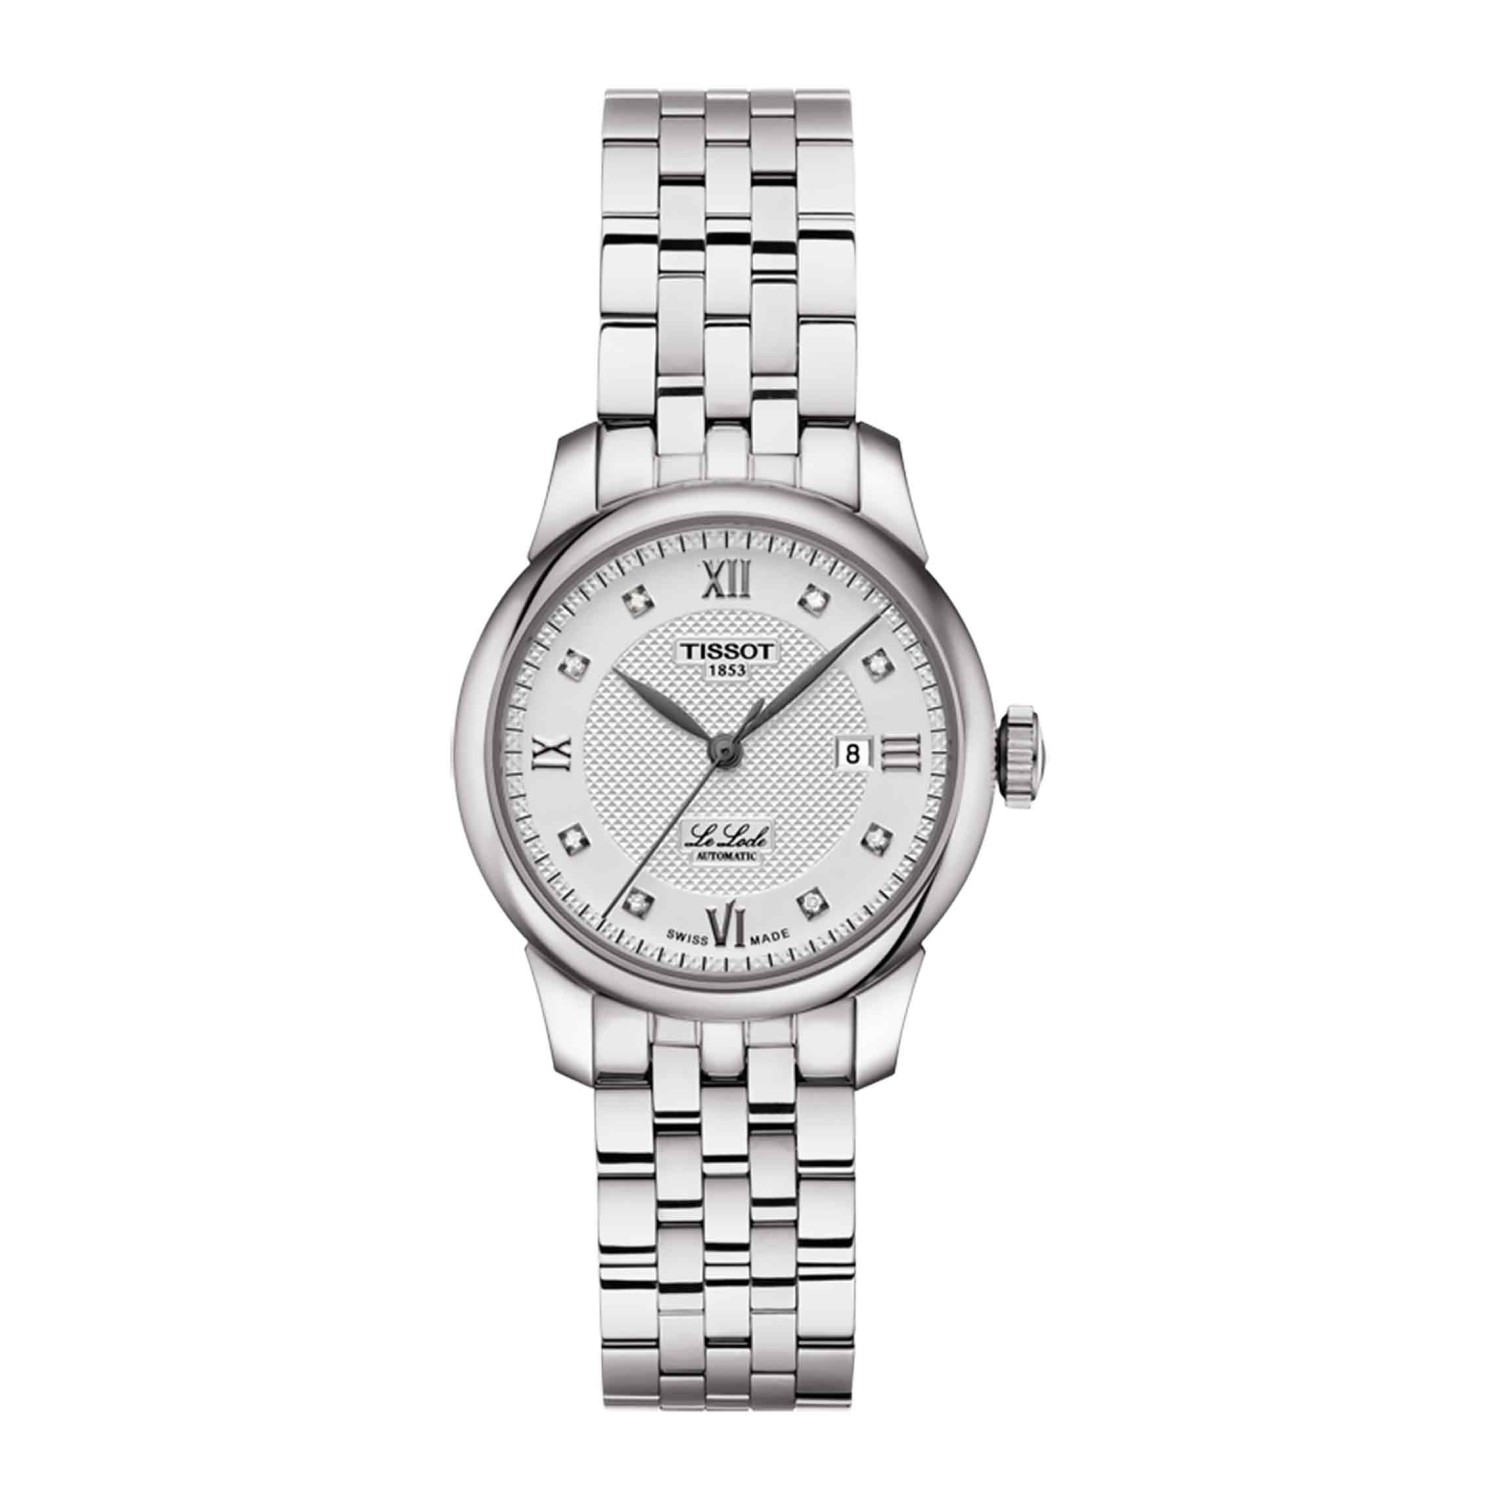 TISSOT Le Locle Automatic Lady T006.207.11.036.00. Tissot watch in great design. The watch case is made of stainless steel and equipped with sapphire crystal. In addition, the watch comes with a automatic movement and is splash resistant. Thus, it is a de